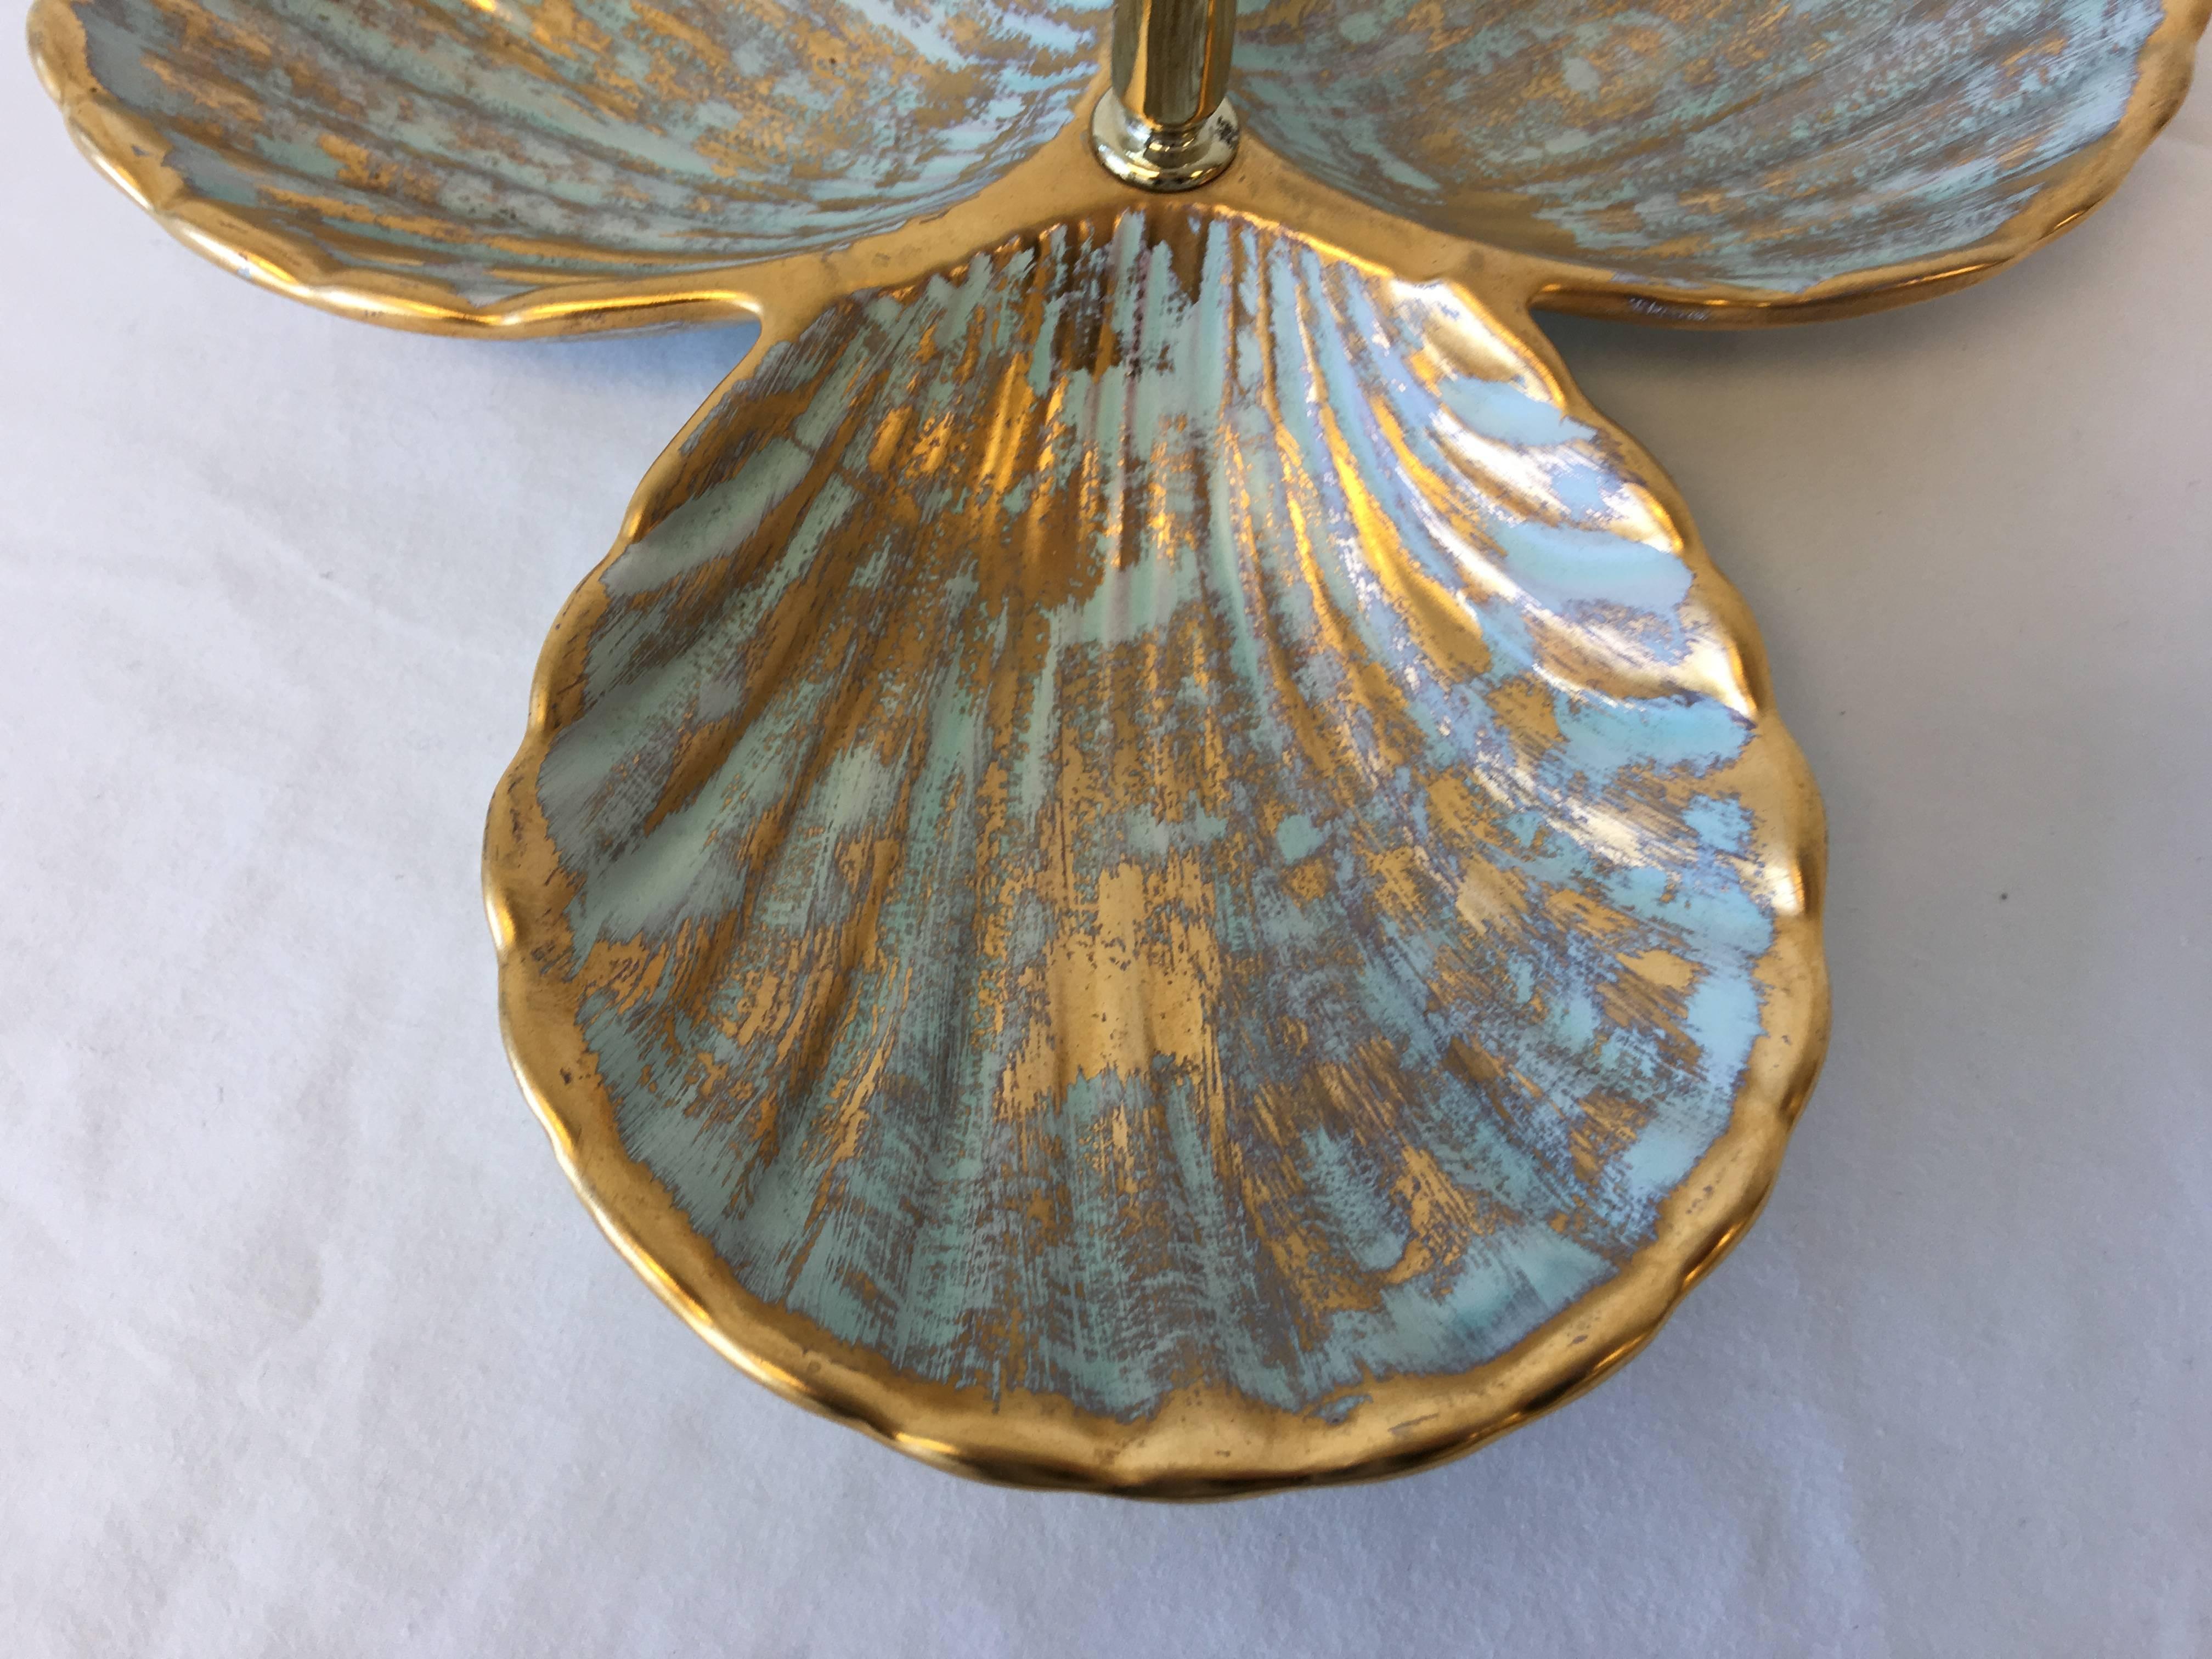 Painted 1970s Stangl Gold and Turquoise Seashell Serving Dish